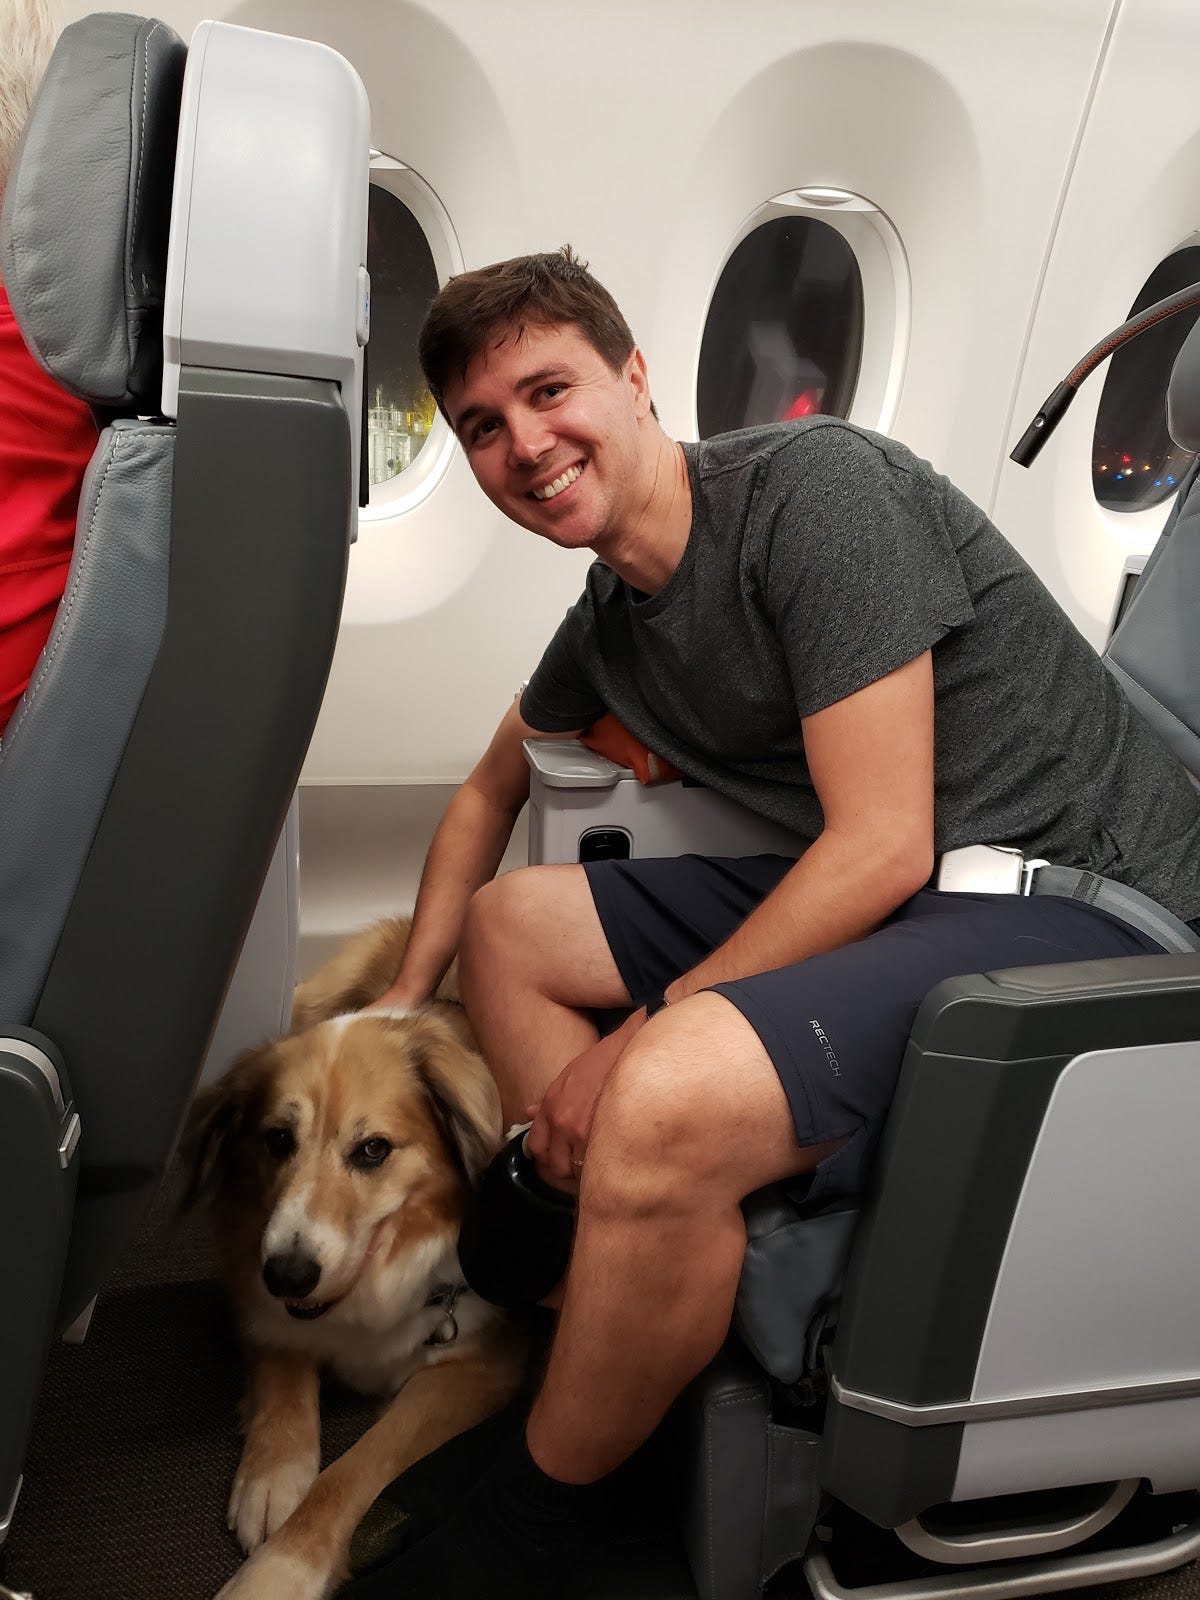 Flying with emotional support animals 